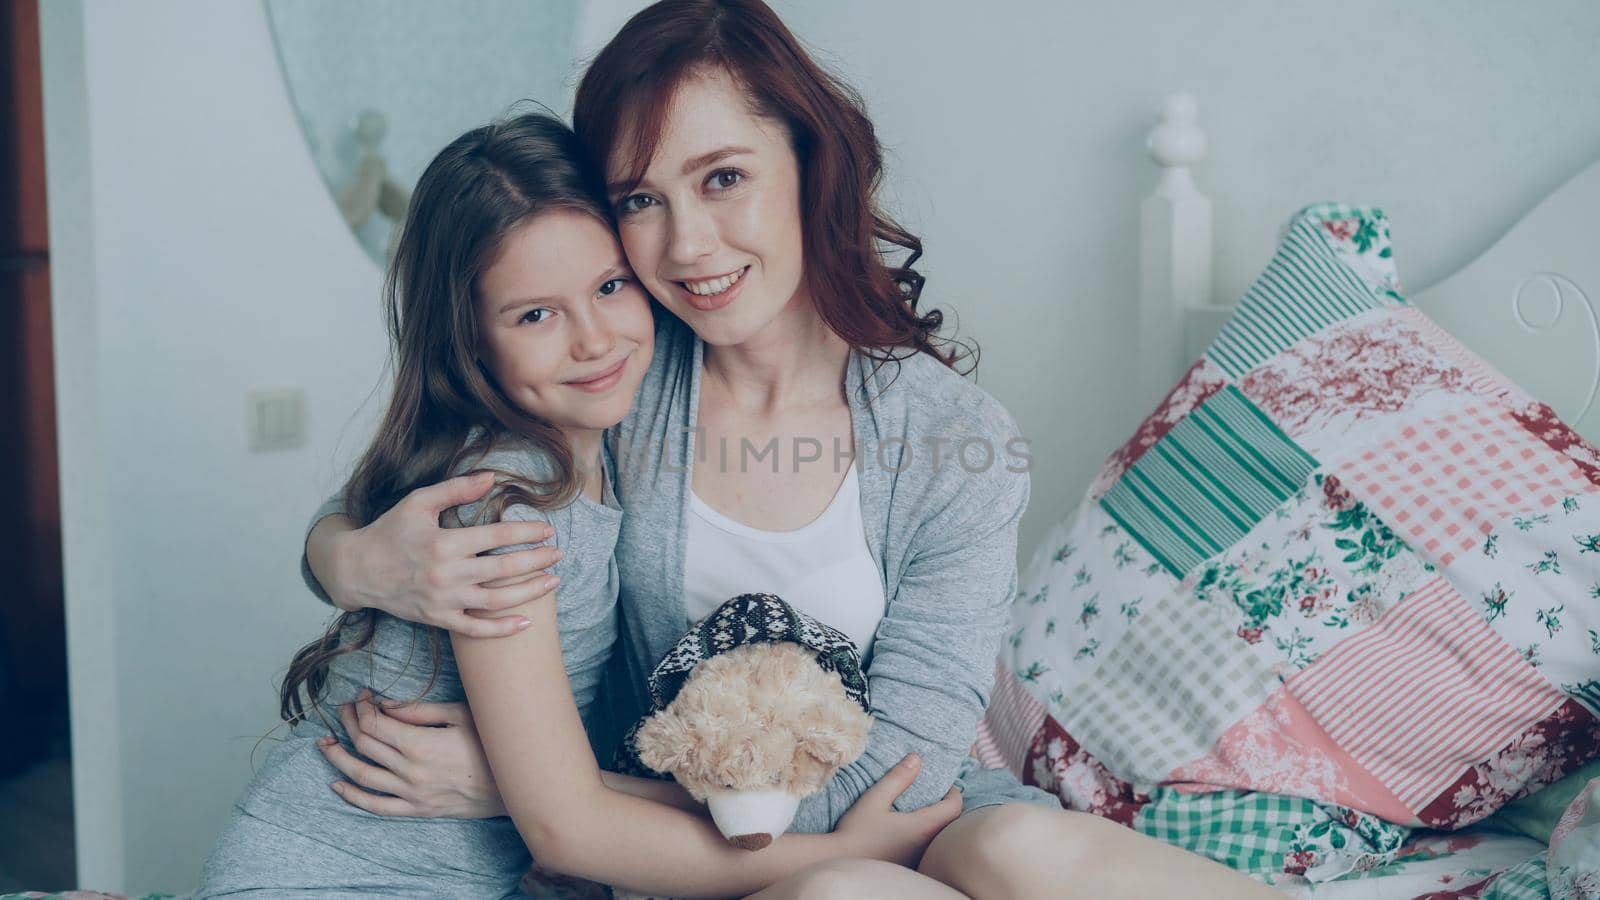 Portrait of adorable smiling girl embracing her happy mother and looking at camera together while sitting on bed in bright bedroom at home by silverkblack